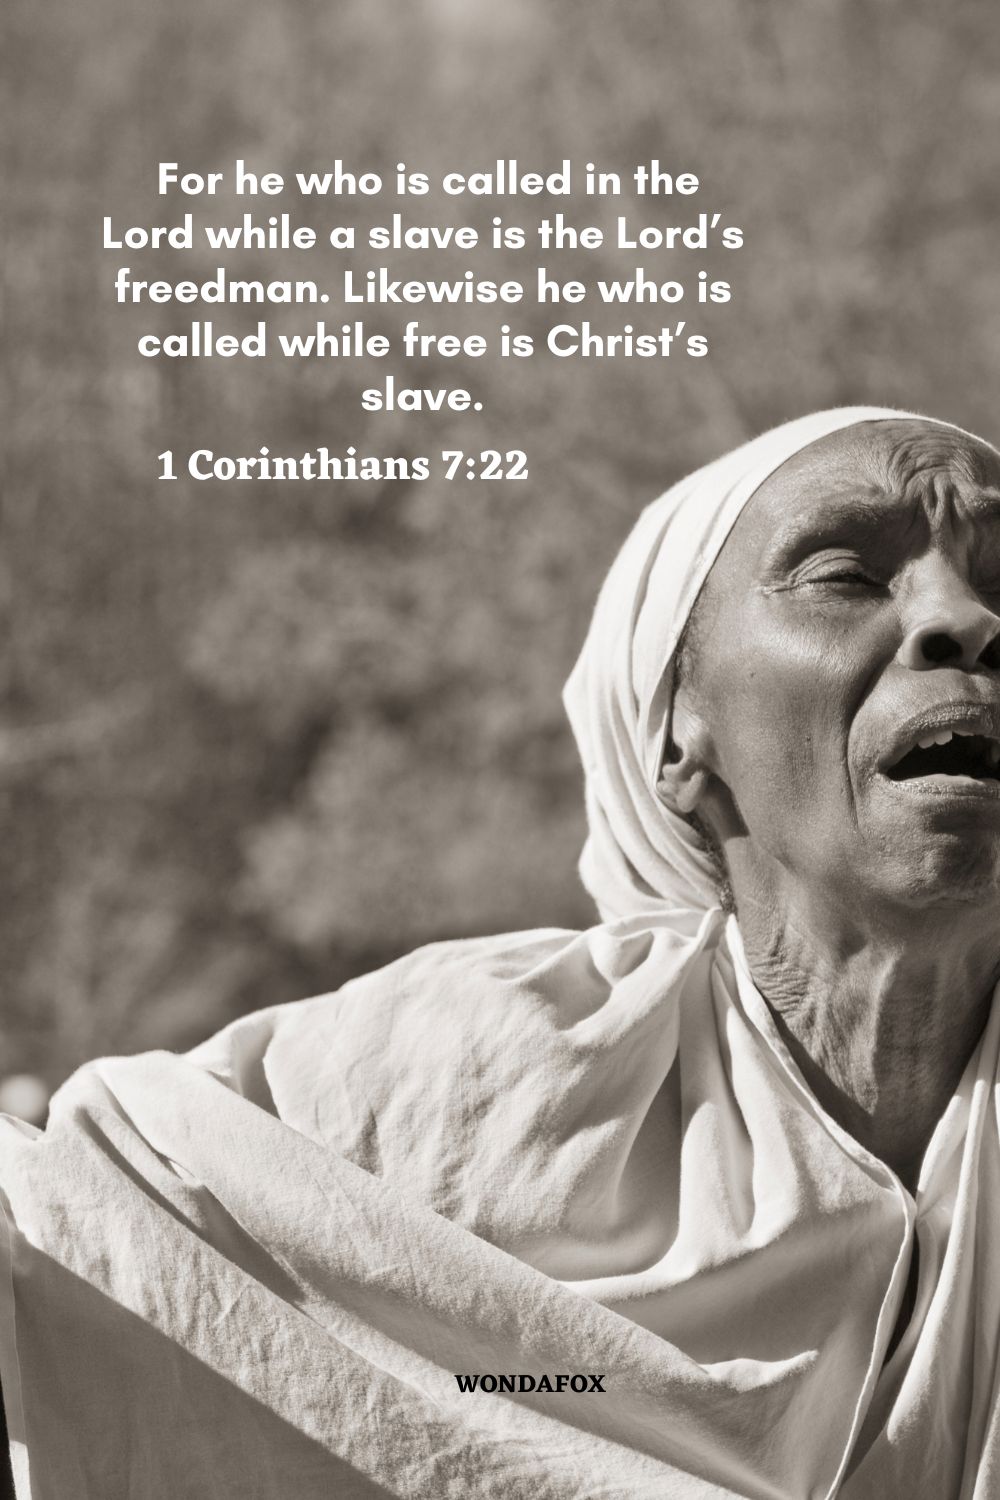  For he who is called in the Lord while a slave is the Lord’s freedman. Likewise he who is called while free is Christ’s slave.
1 Corinthians 7:22